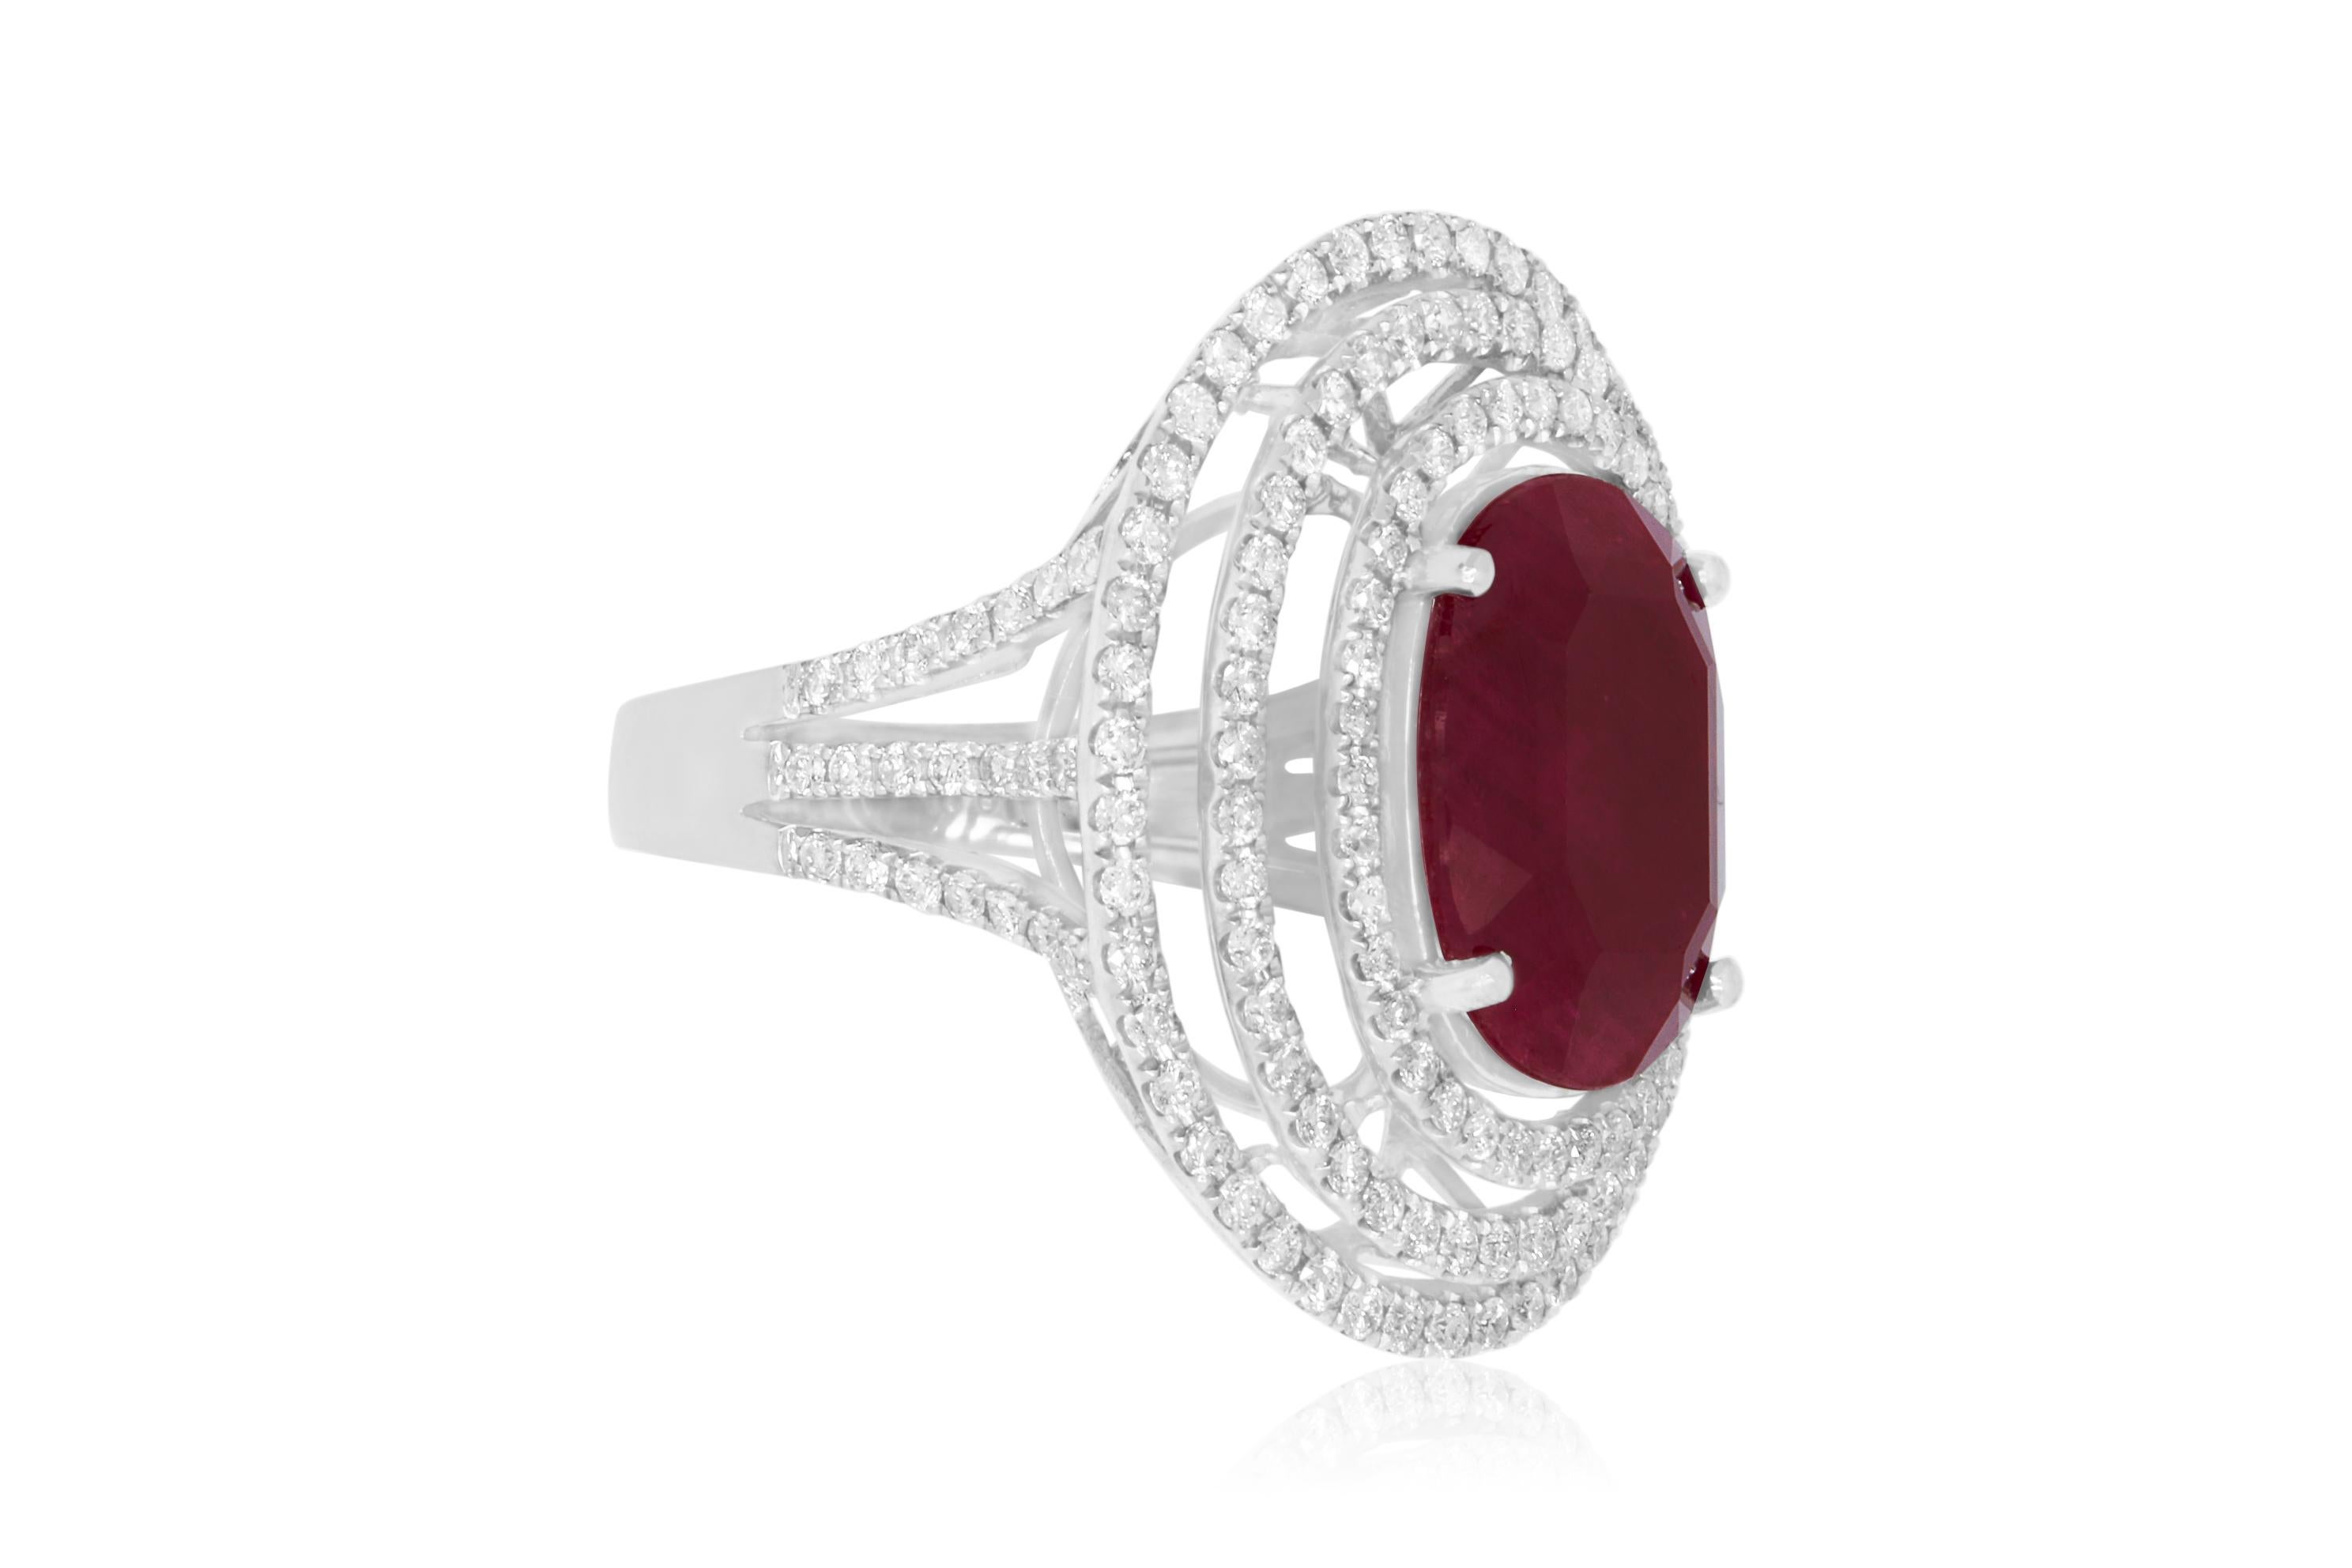 Oval Cut 7.06 Carat Oval Ruby and 2.25 Carat White Diamond Ring